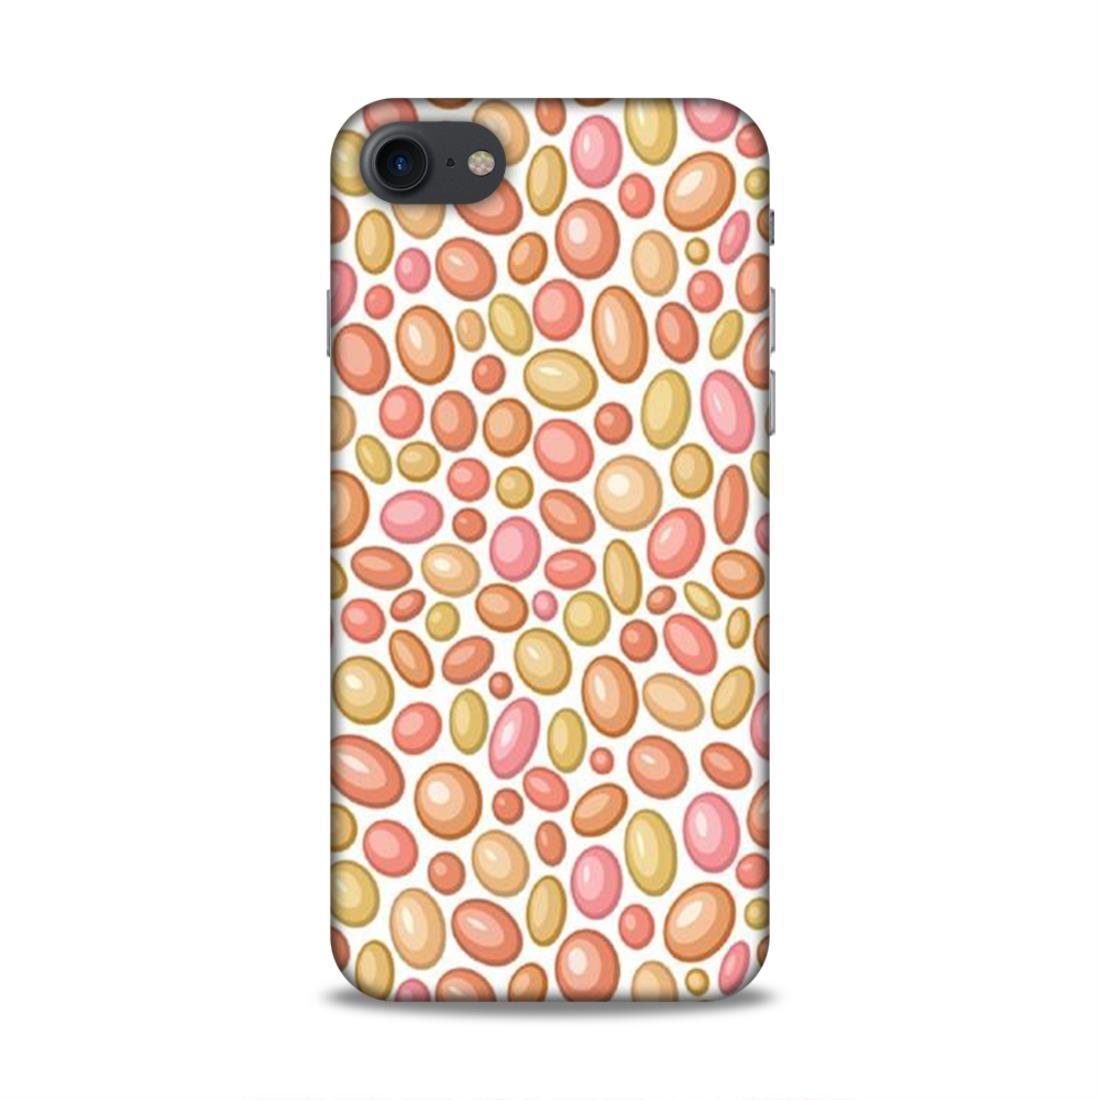 Fancy New Pattern iPhone 8 Phone Case Cover